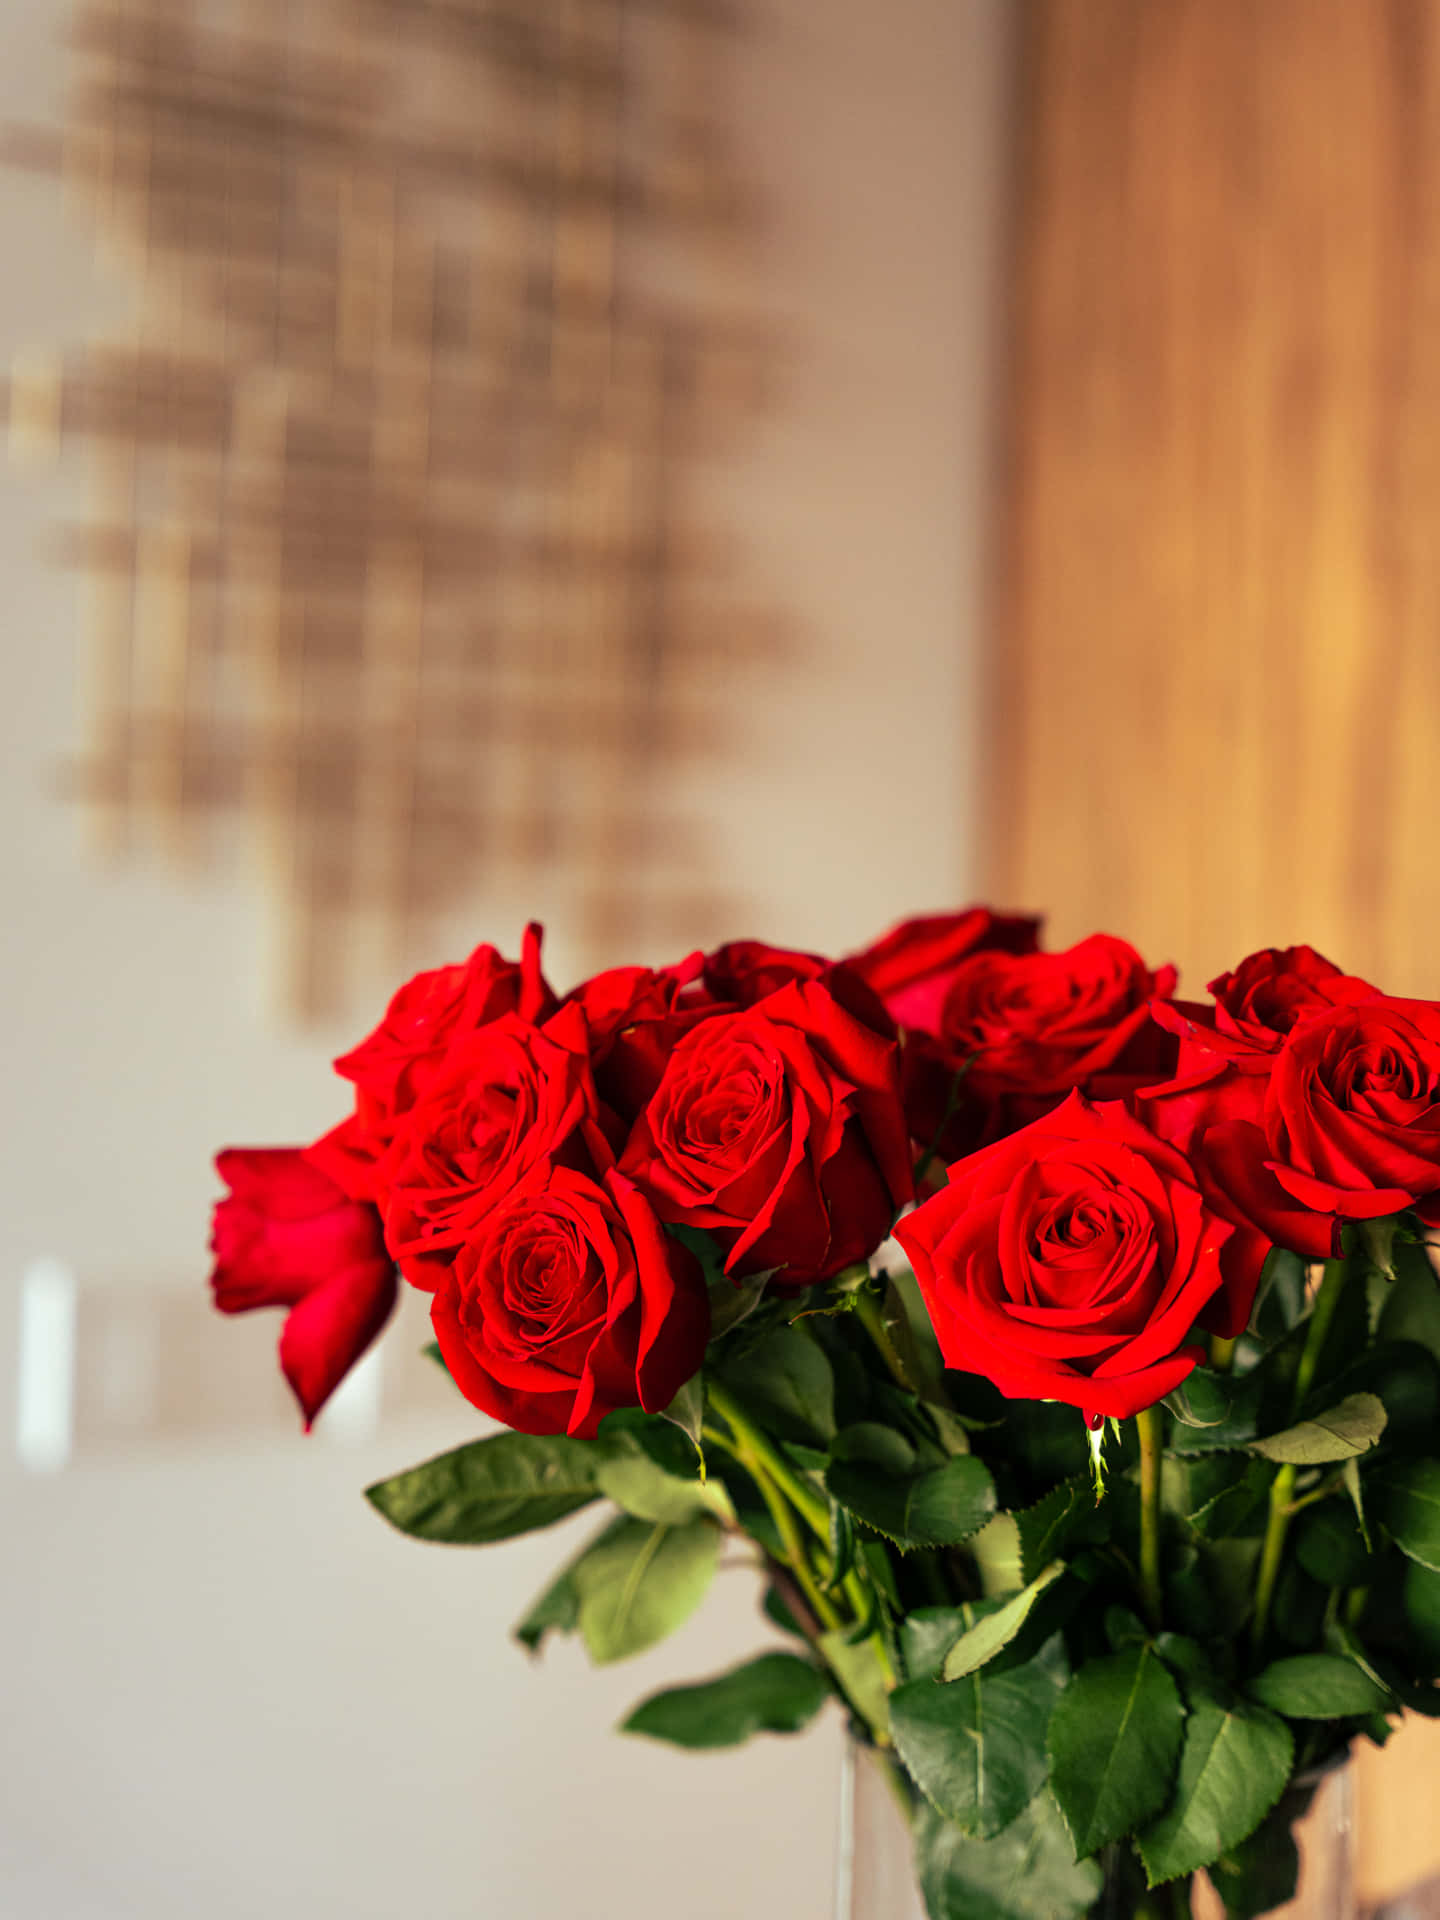 Rose Bouquet In Room Pictures